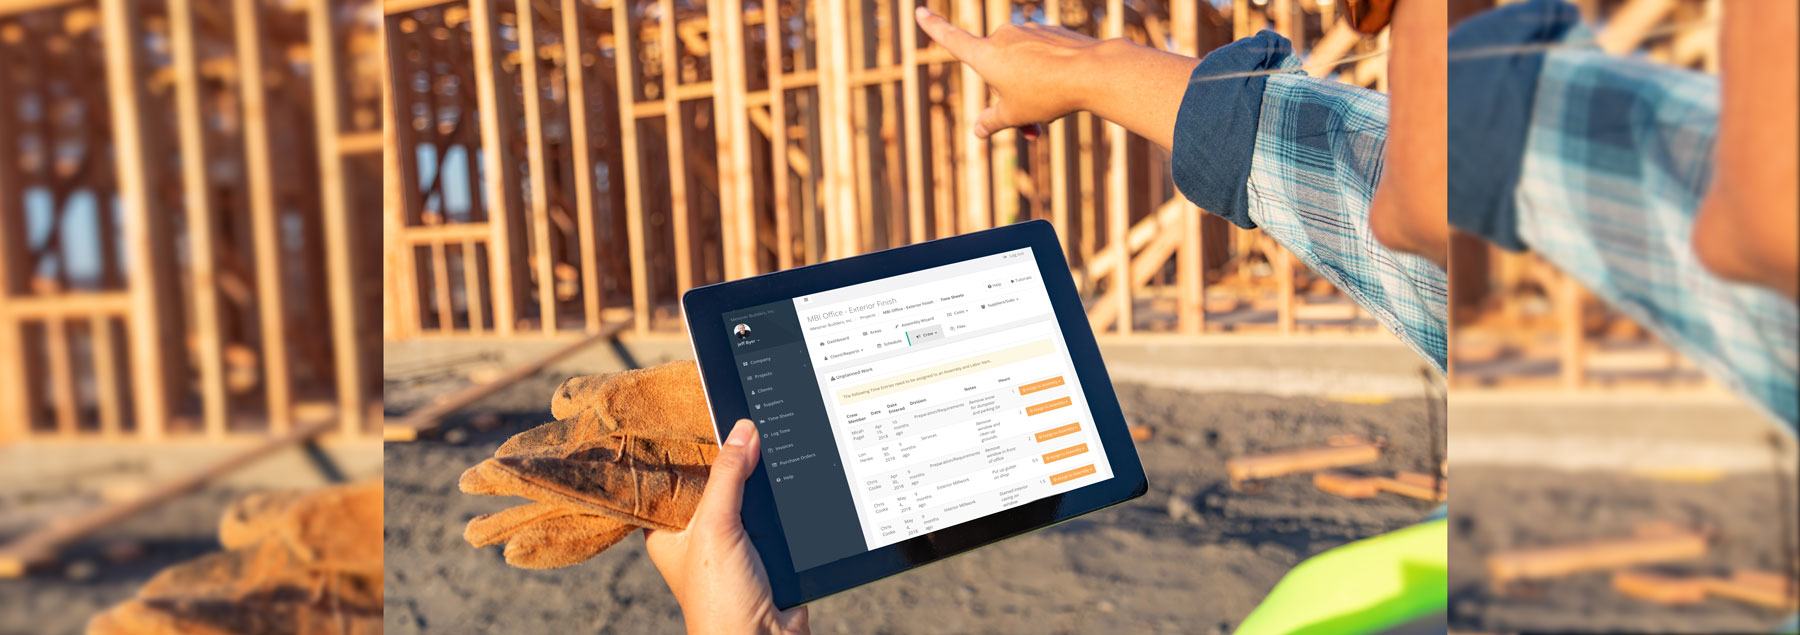 Estimator360 is a construction management software that makes manajing your contruction projects a breeze and can make estimating new projects much more simple than manual estimating.